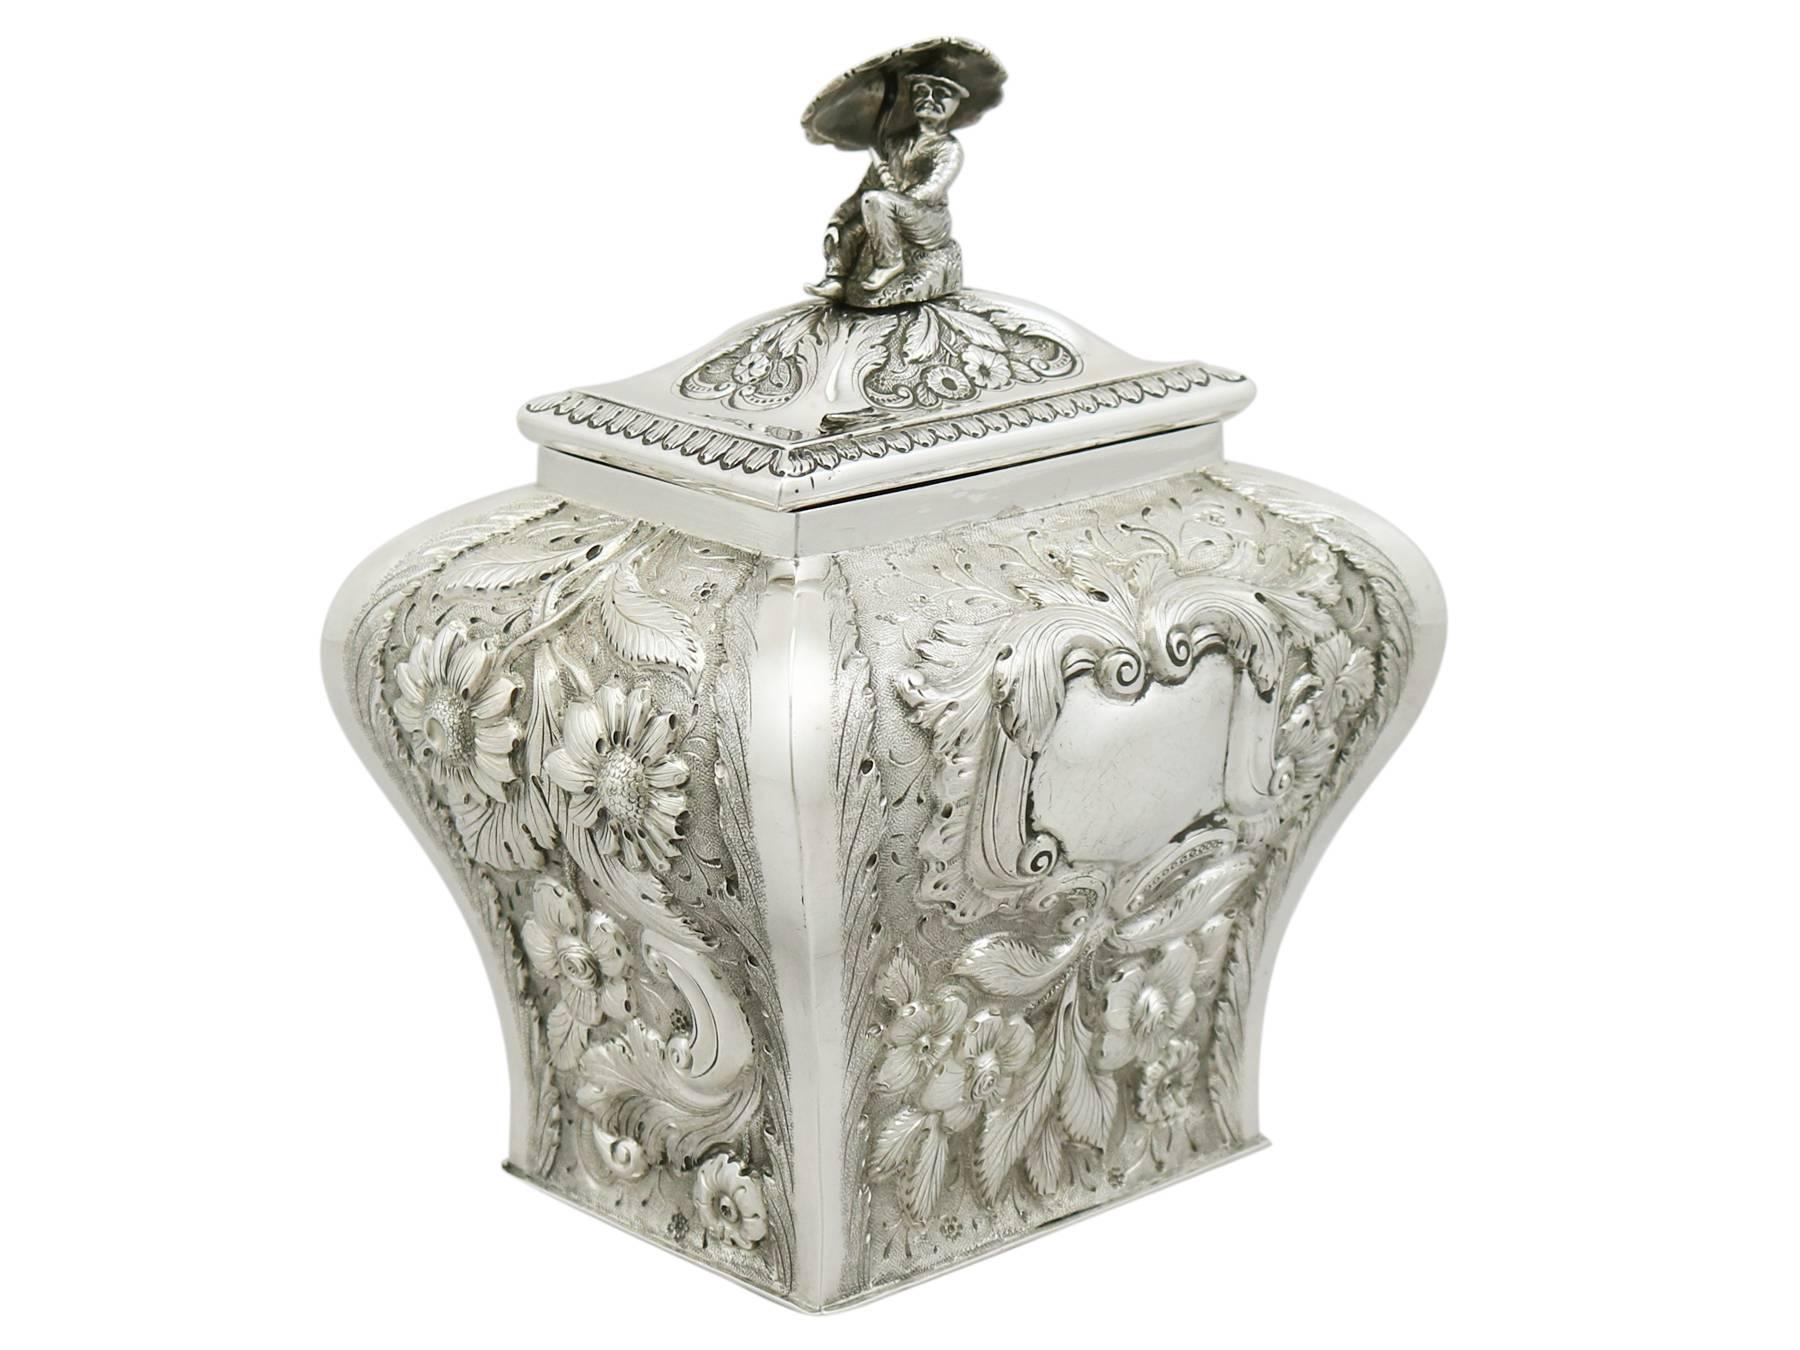 A magnificent, fine and impressive antique George IV Irish sterling silver tea caddy; an addition to AC Silver's silver teaware collection.

This magnificent antique George IV Irish silver tea caddy, in sterling standard, has an oblong bomb shaped